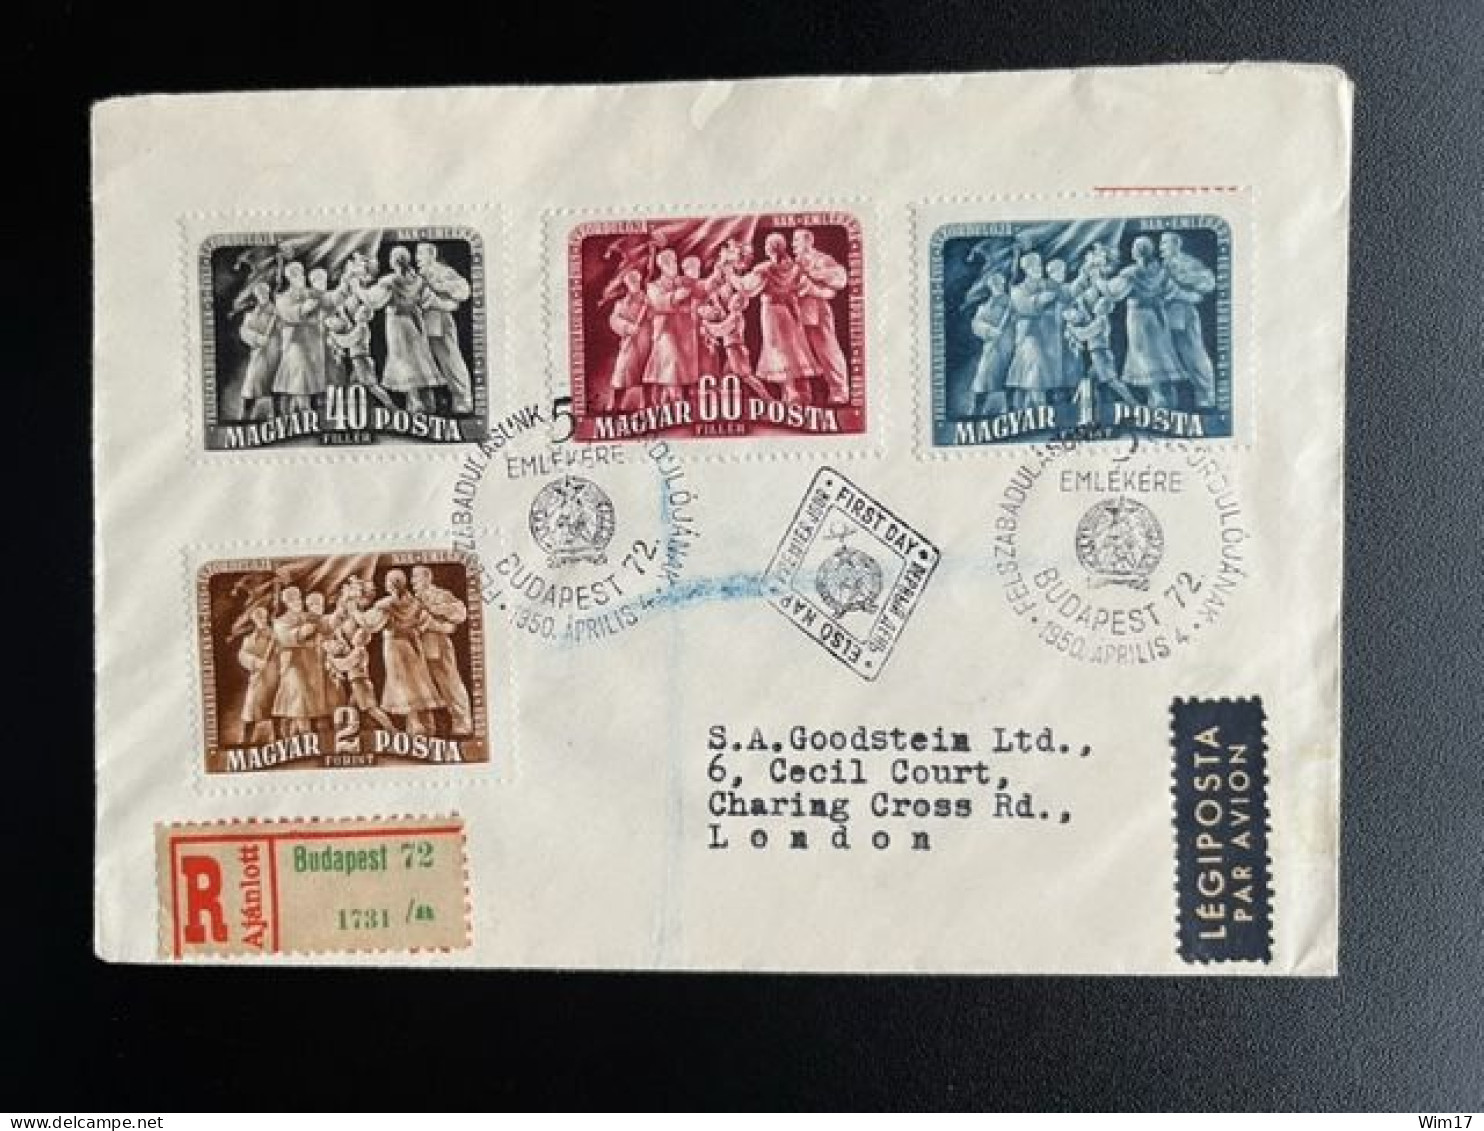 HUNGARY MAGYAR 1950 REGISTERED FDC 5TH ANN. LIBERATION SEND TO LONDON 04-04-1950 HONGARIJE UNGARN - FDC